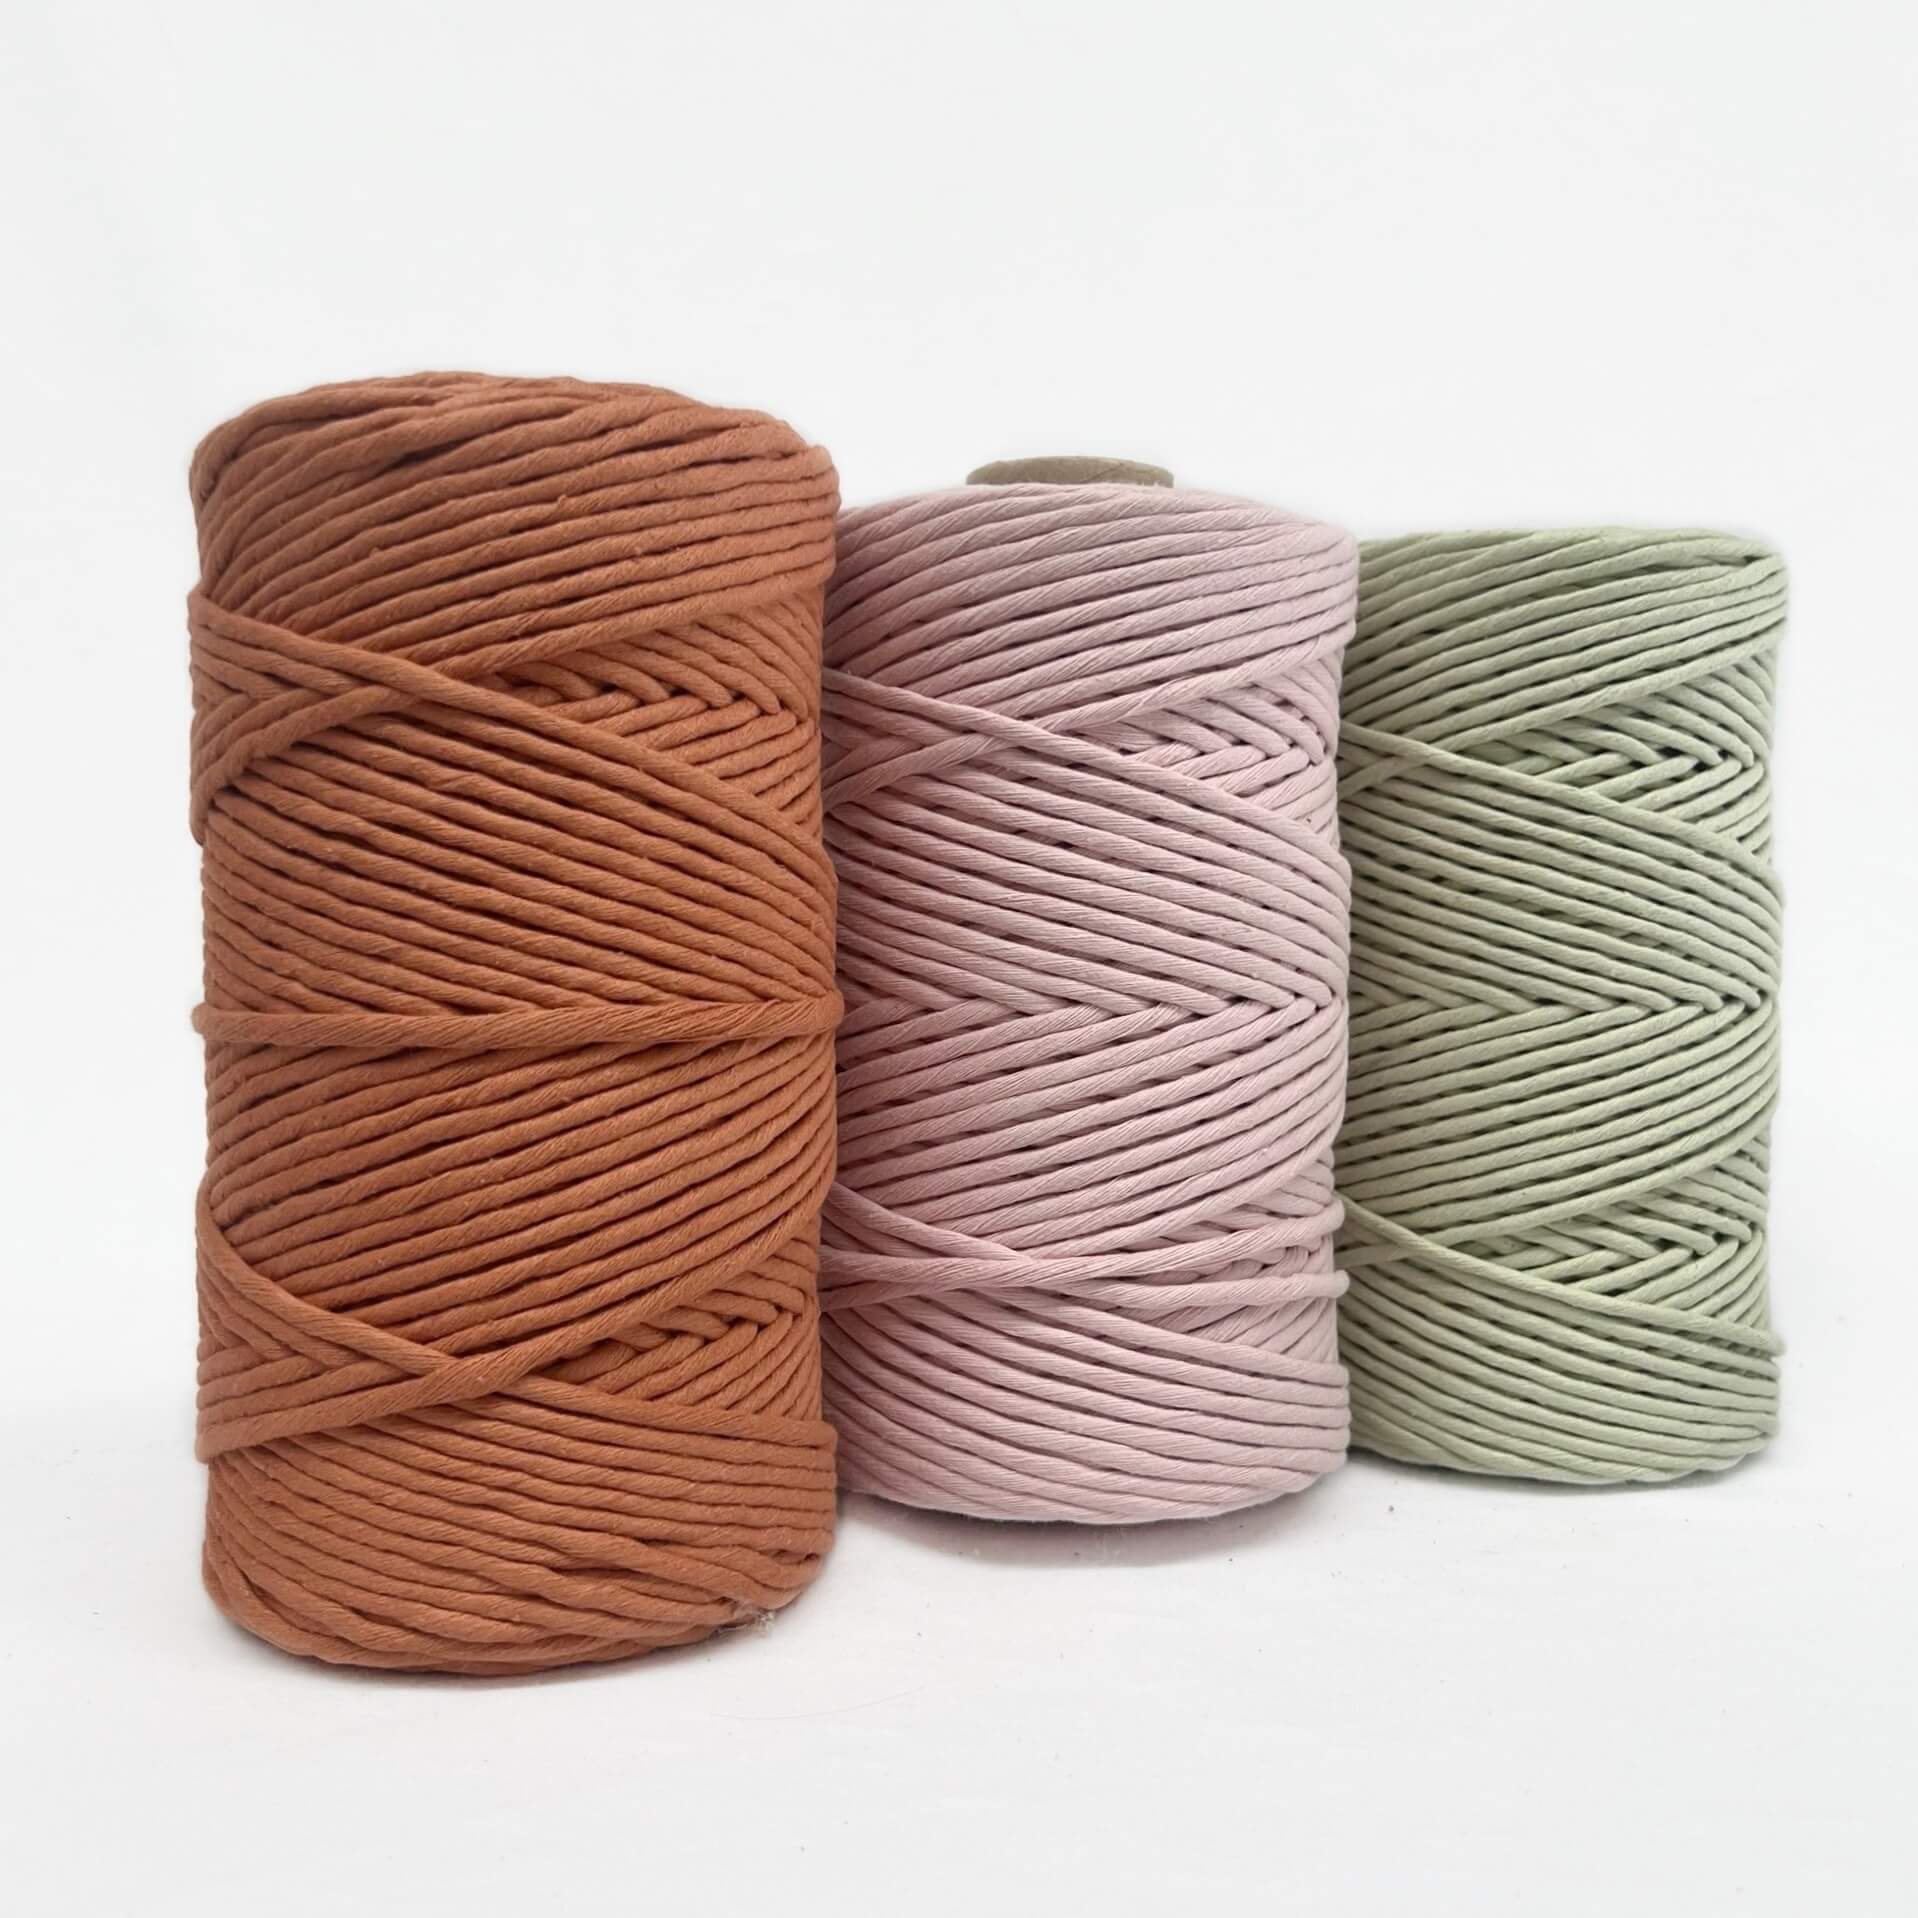 mary maker studio 1kg 5mm recycled cotton macrame string in warm rust maple colour buy online for macrame workshops beginners and advanced artists